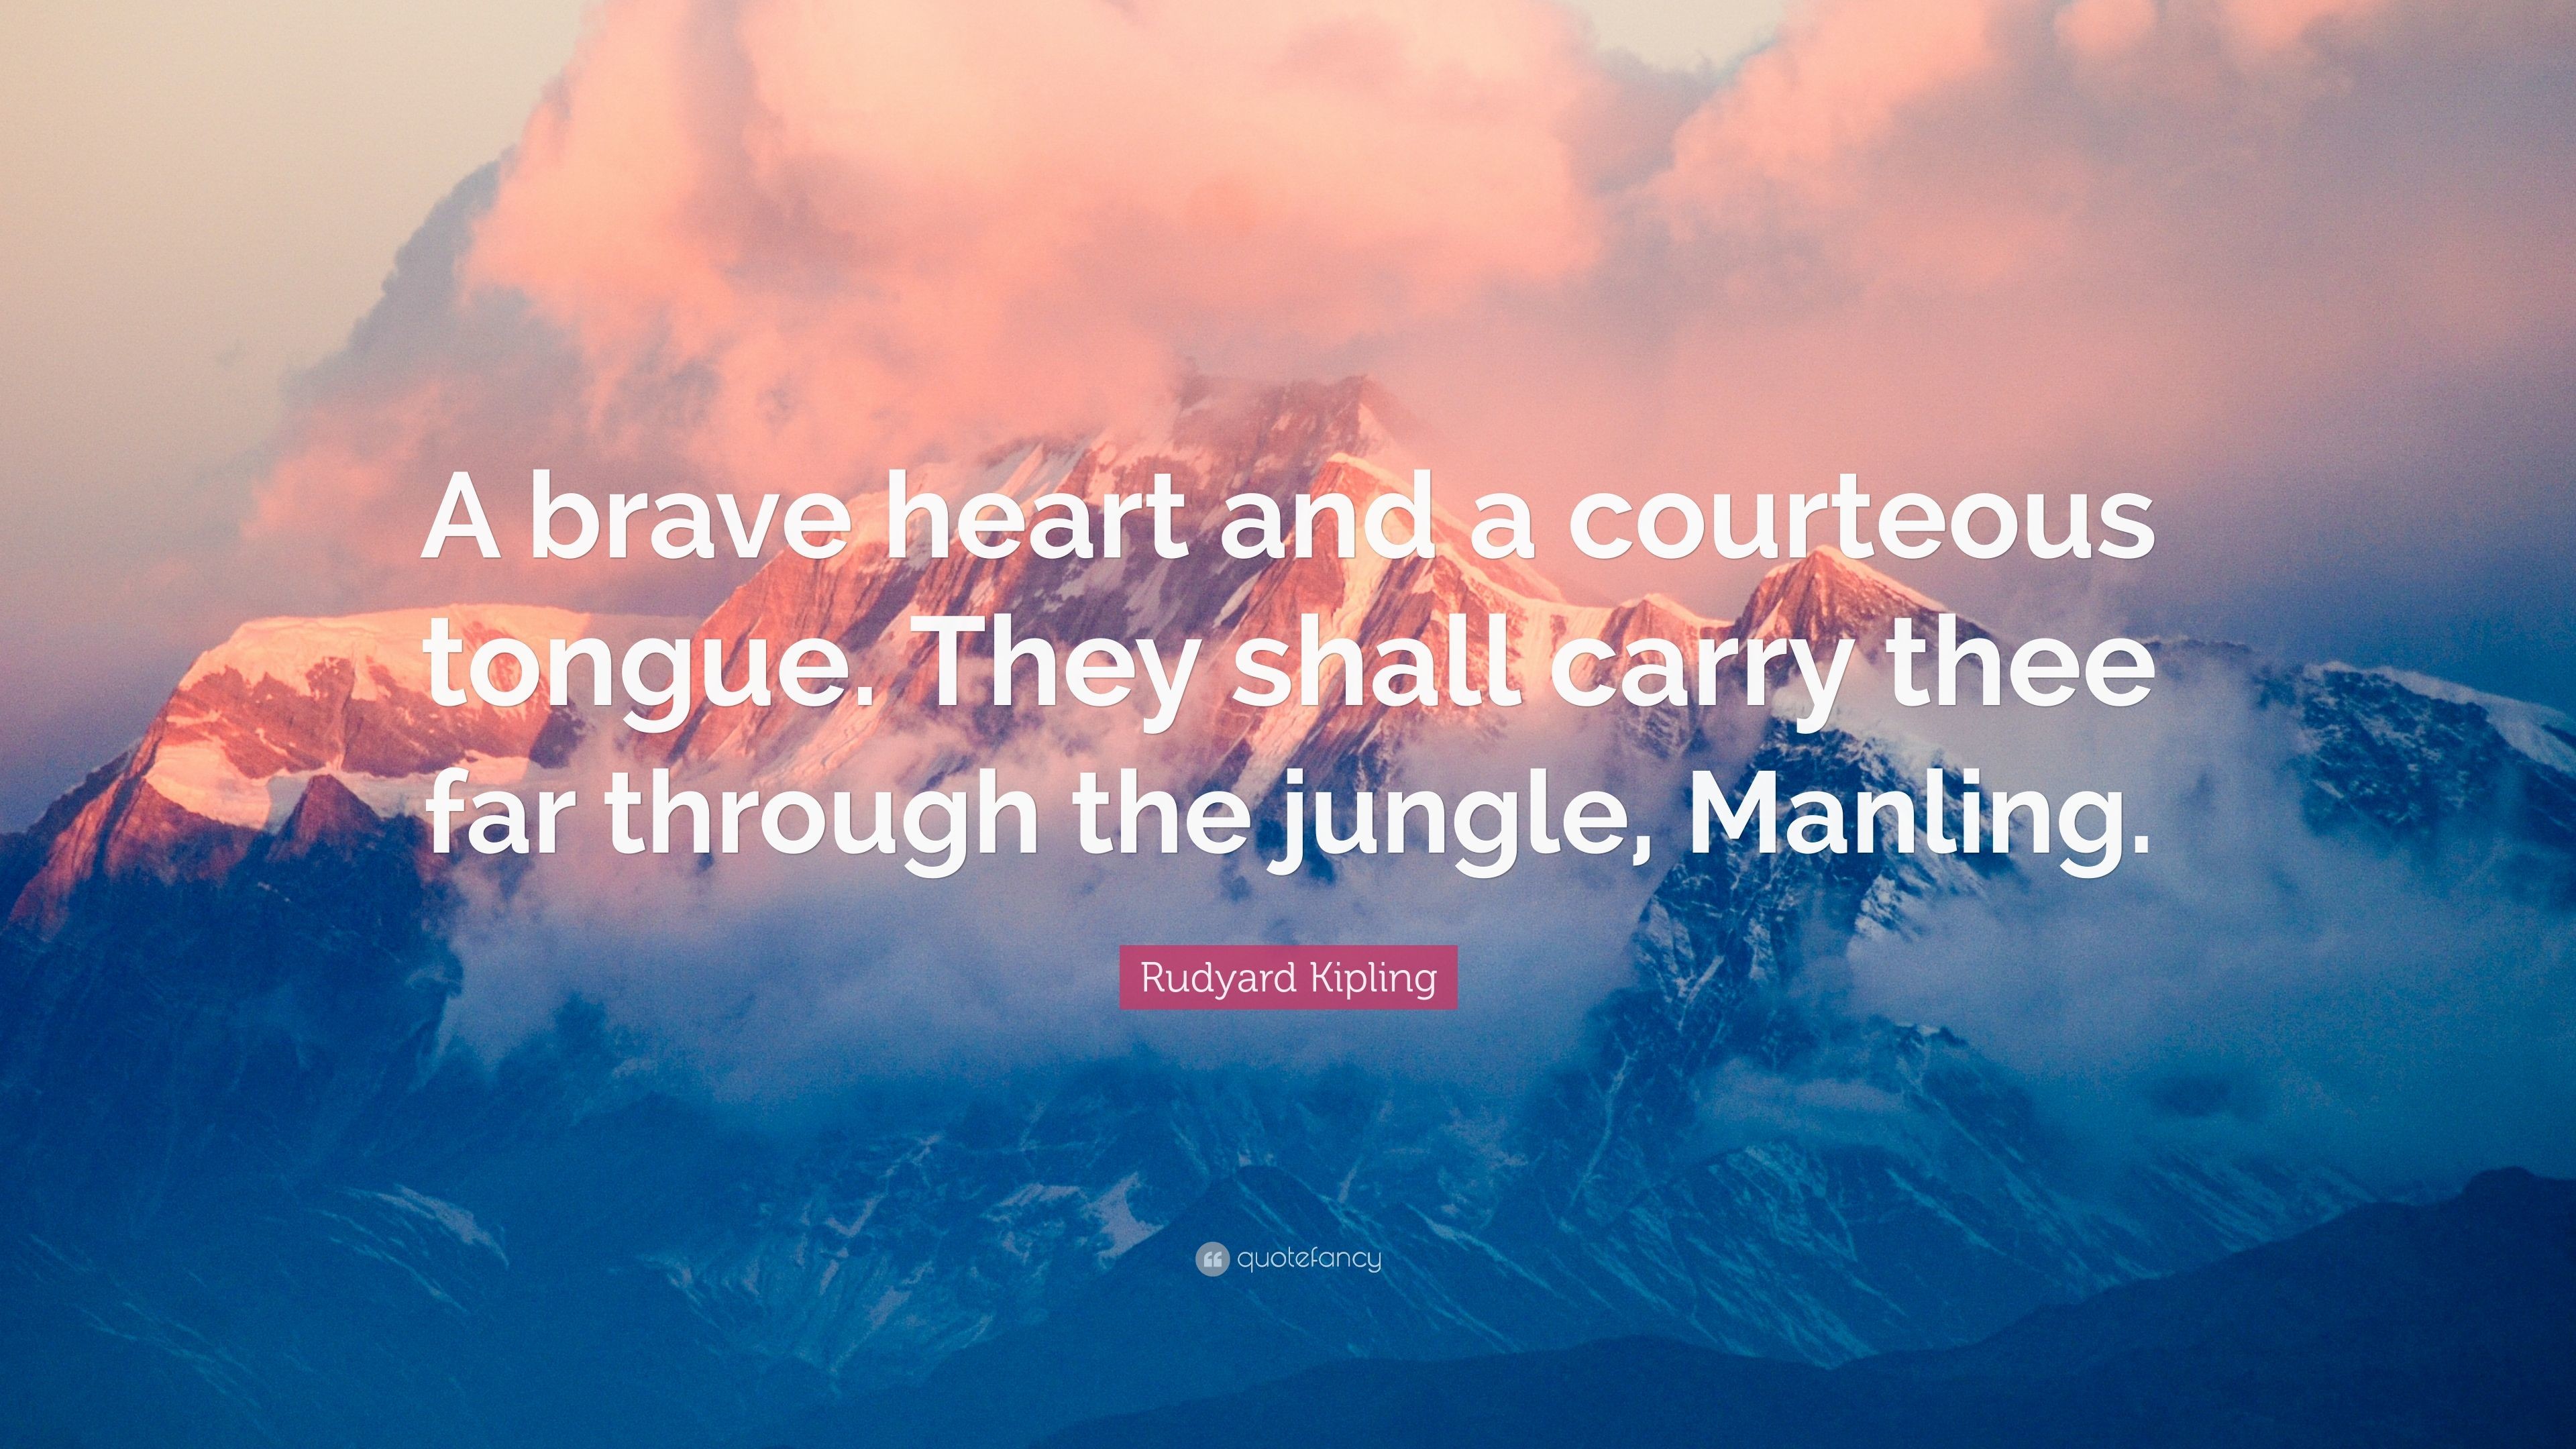 3840x2160 Rudyard Kipling Quote: “A brave heart and a courteous tongue. They shall  carry